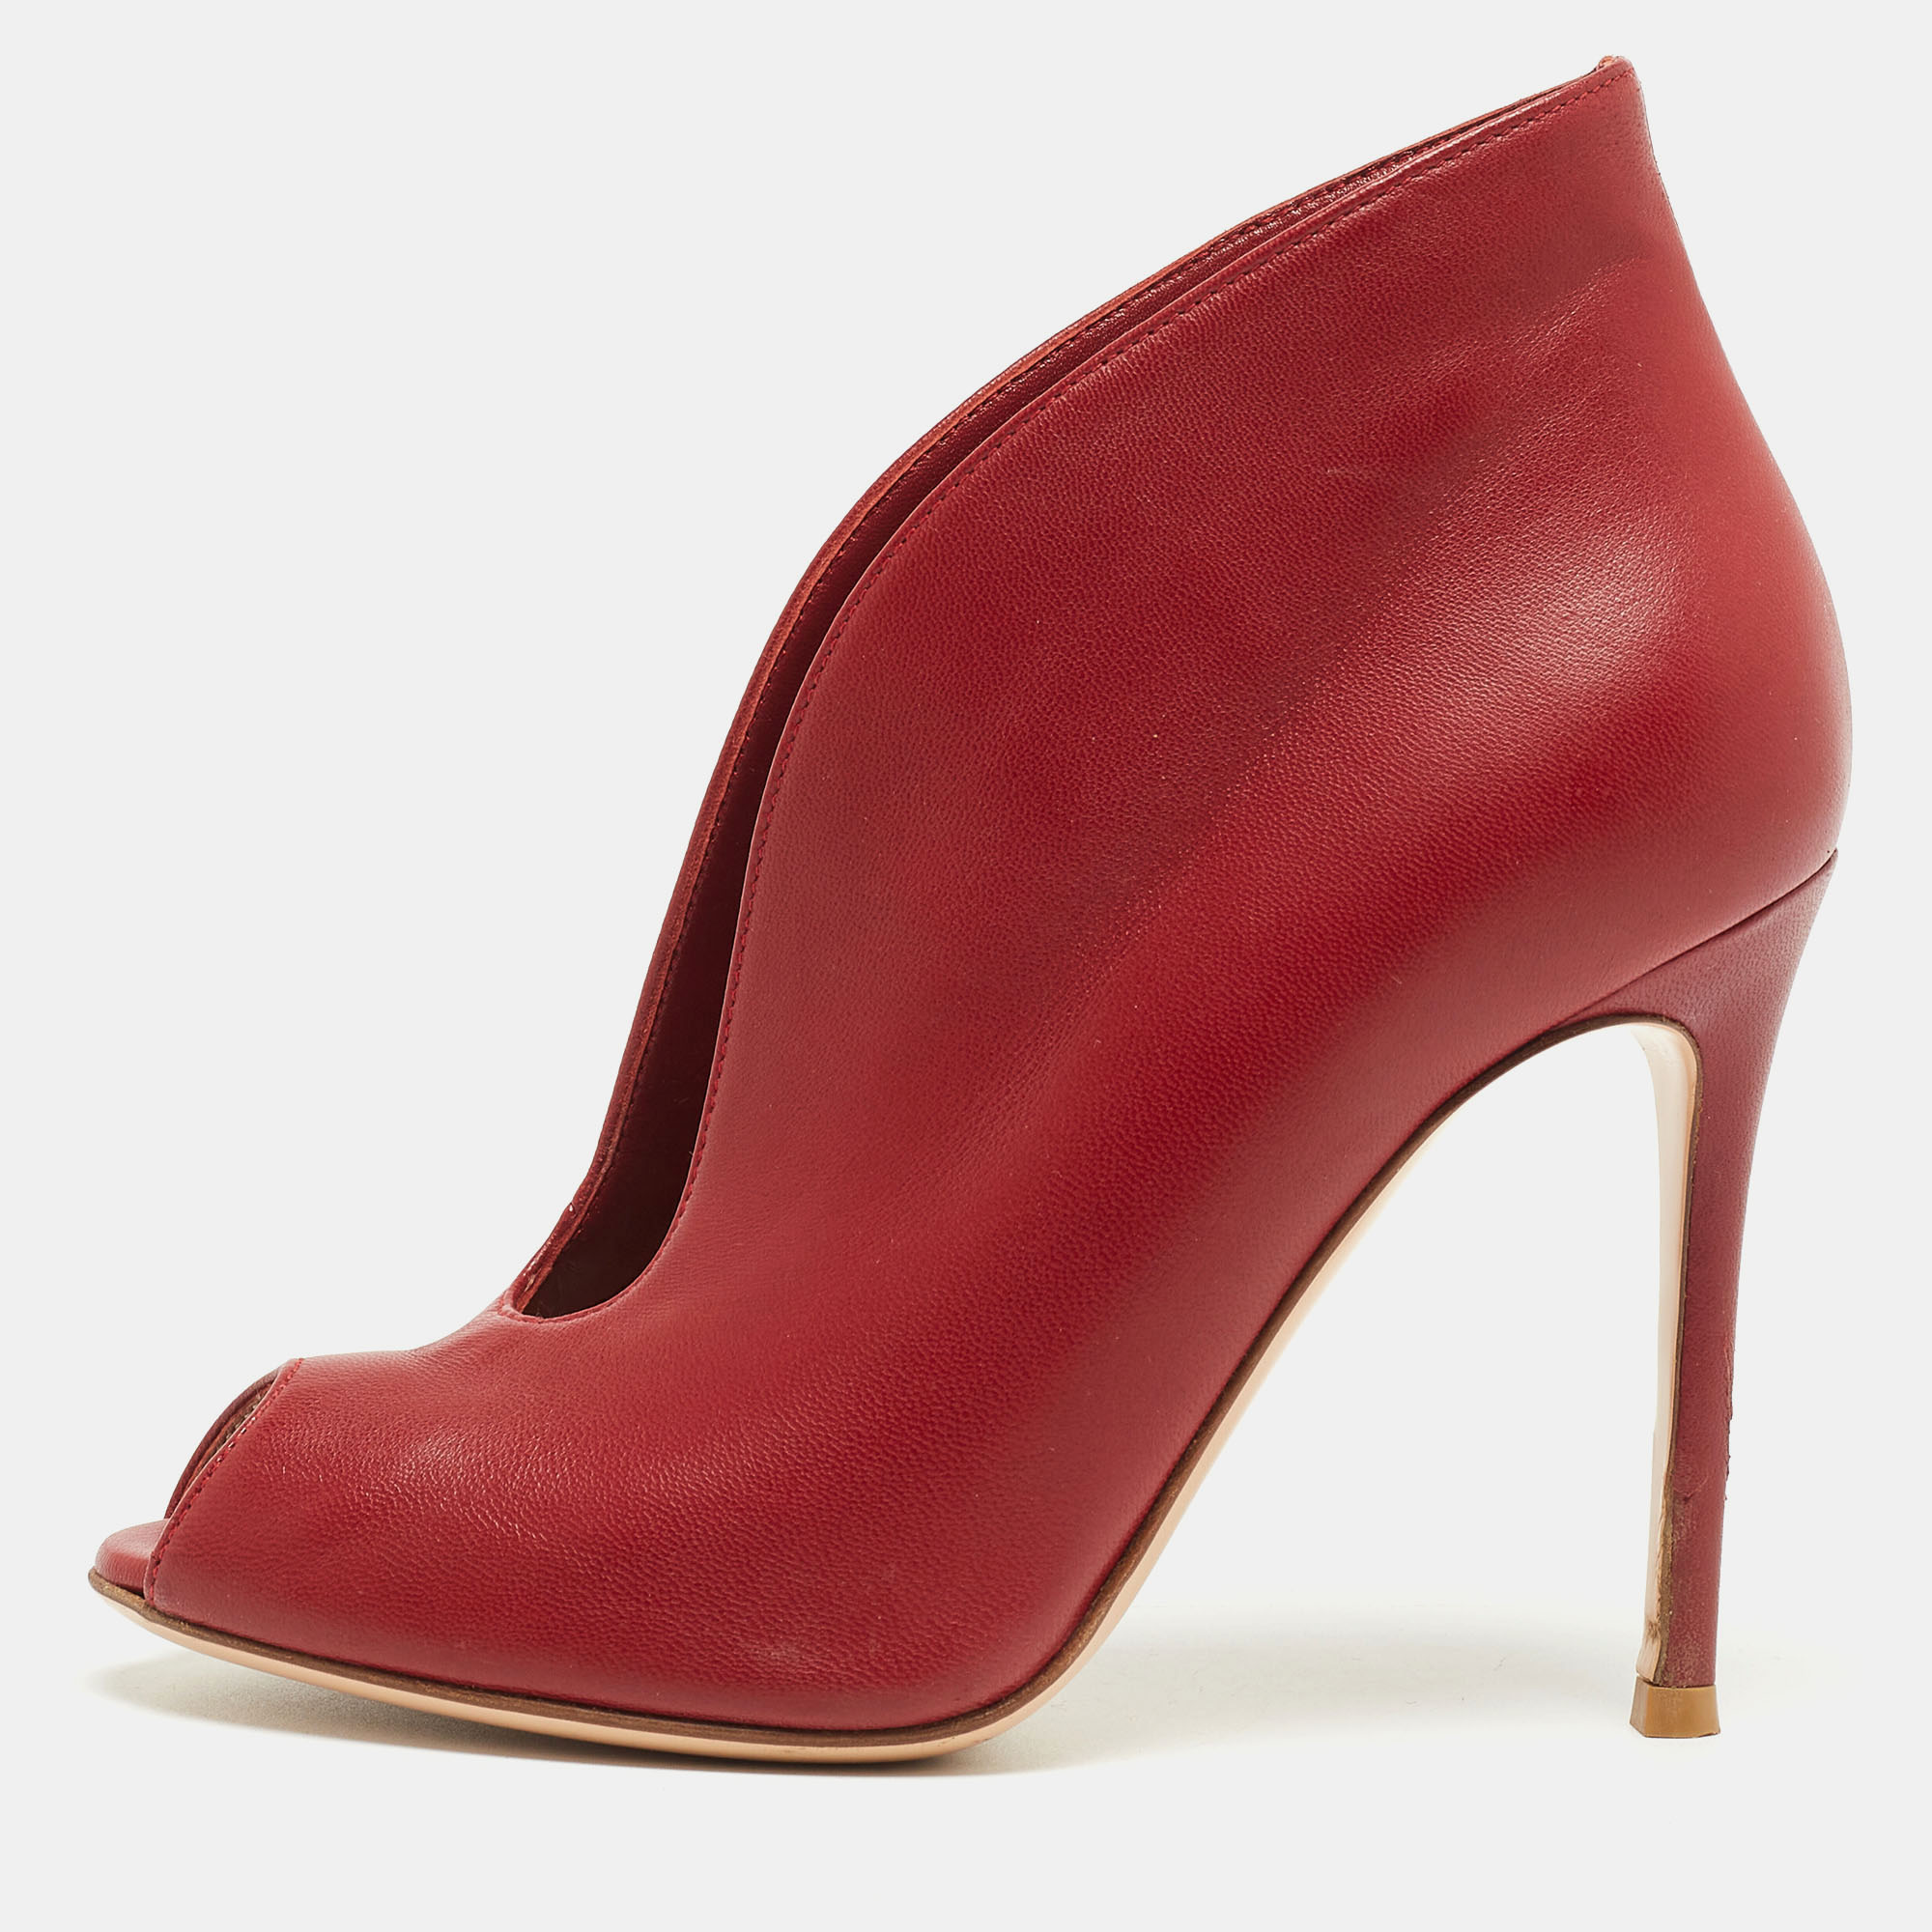 Gianvito Rossi Red Leather Vamp Peep Toe Ankle Booties Size 36